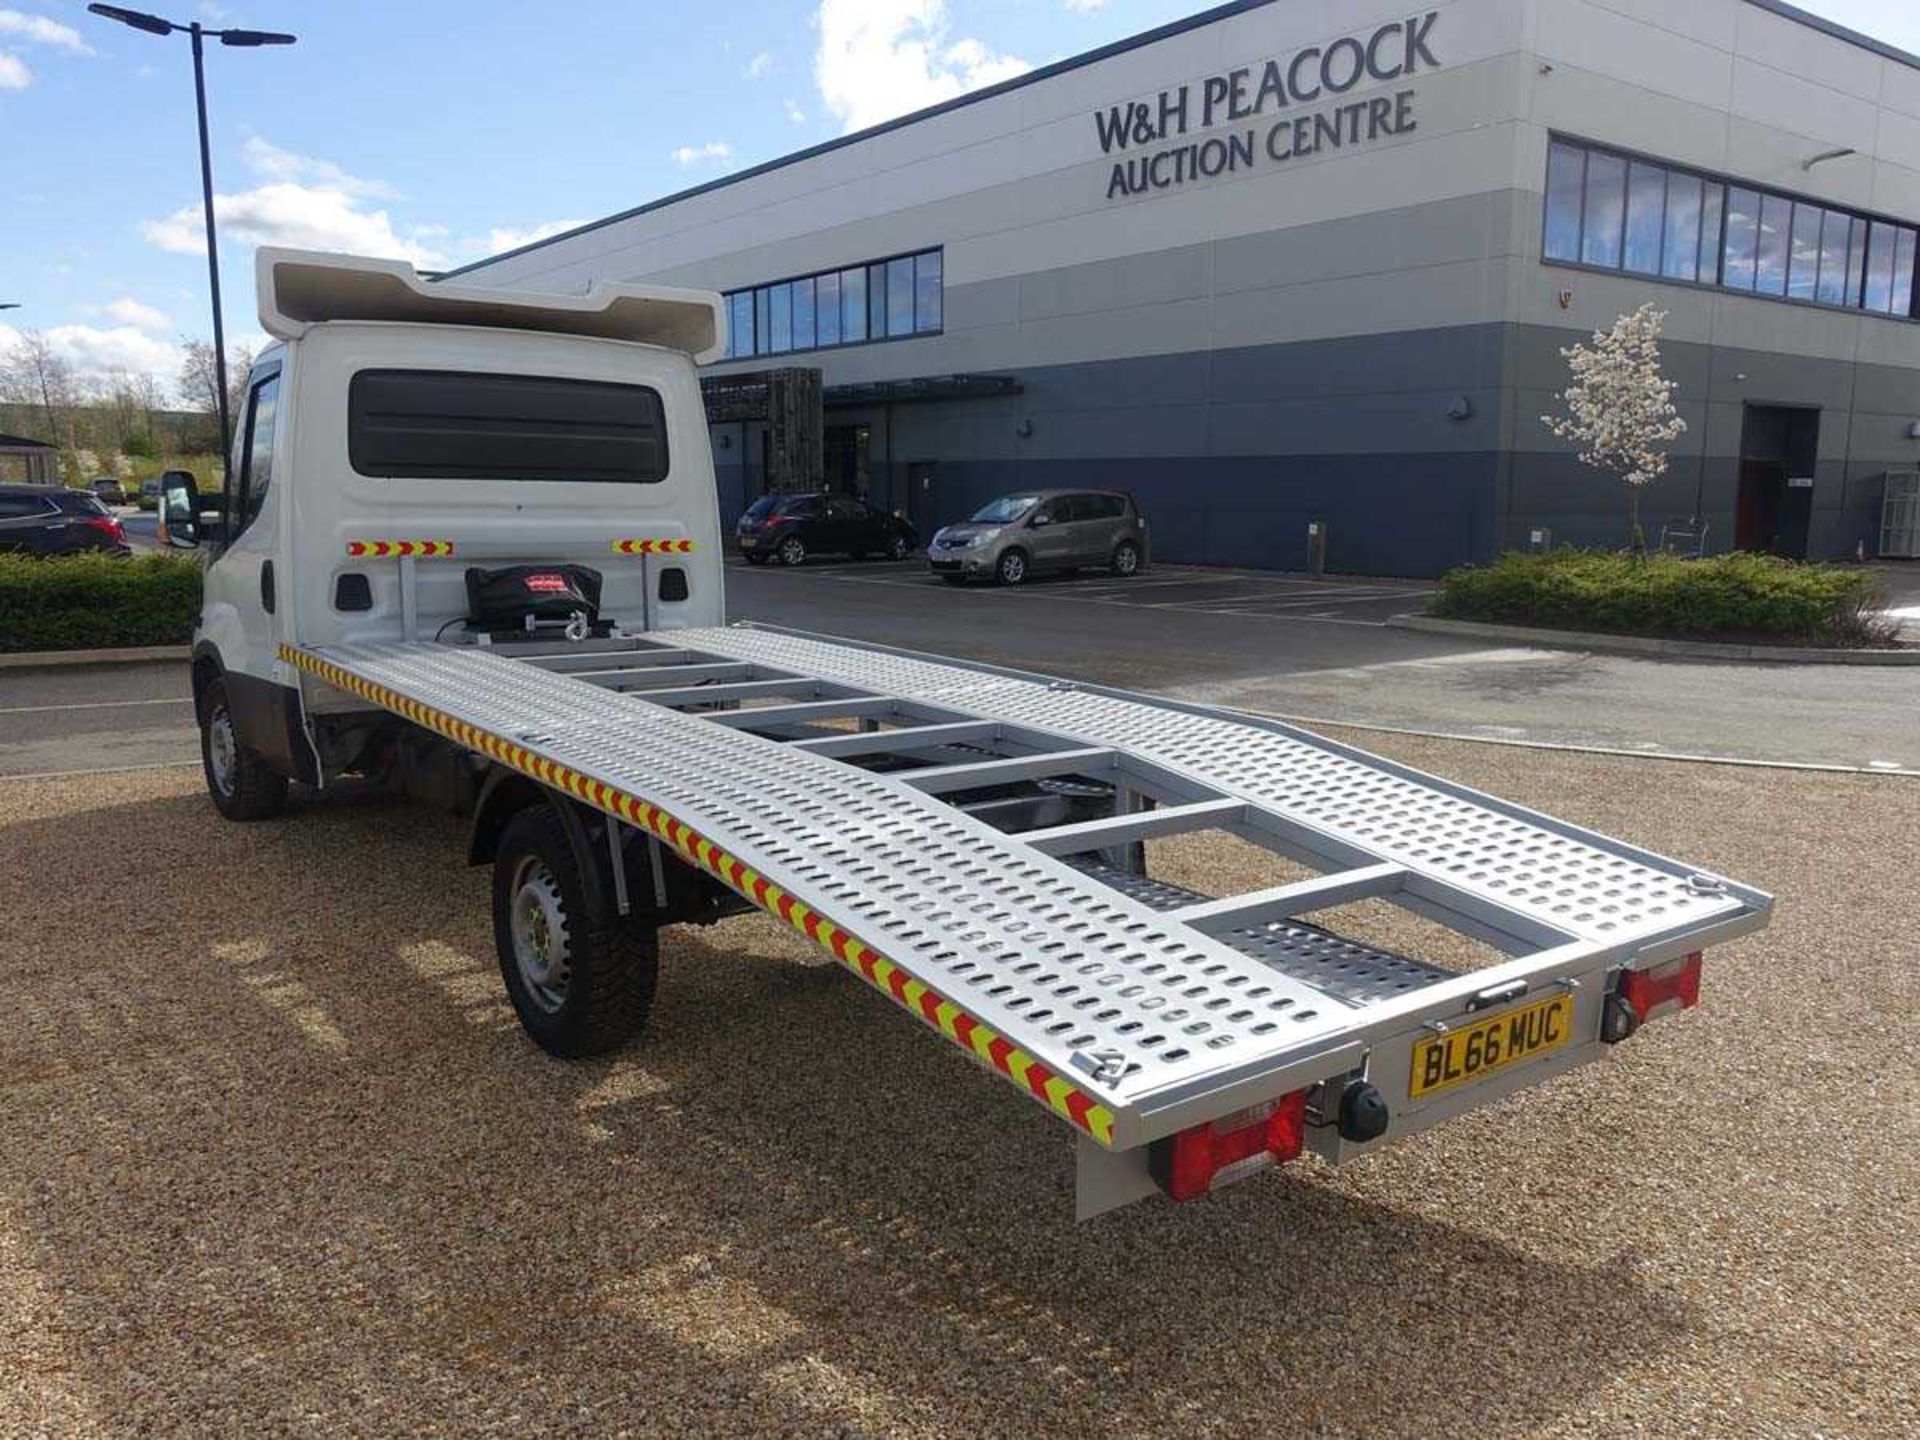 (2016) BL66 MUC - Iveco Daily 35S11 car transporter with 4.7metre beavertail, Winchmax 6.5 tonne - Image 3 of 13